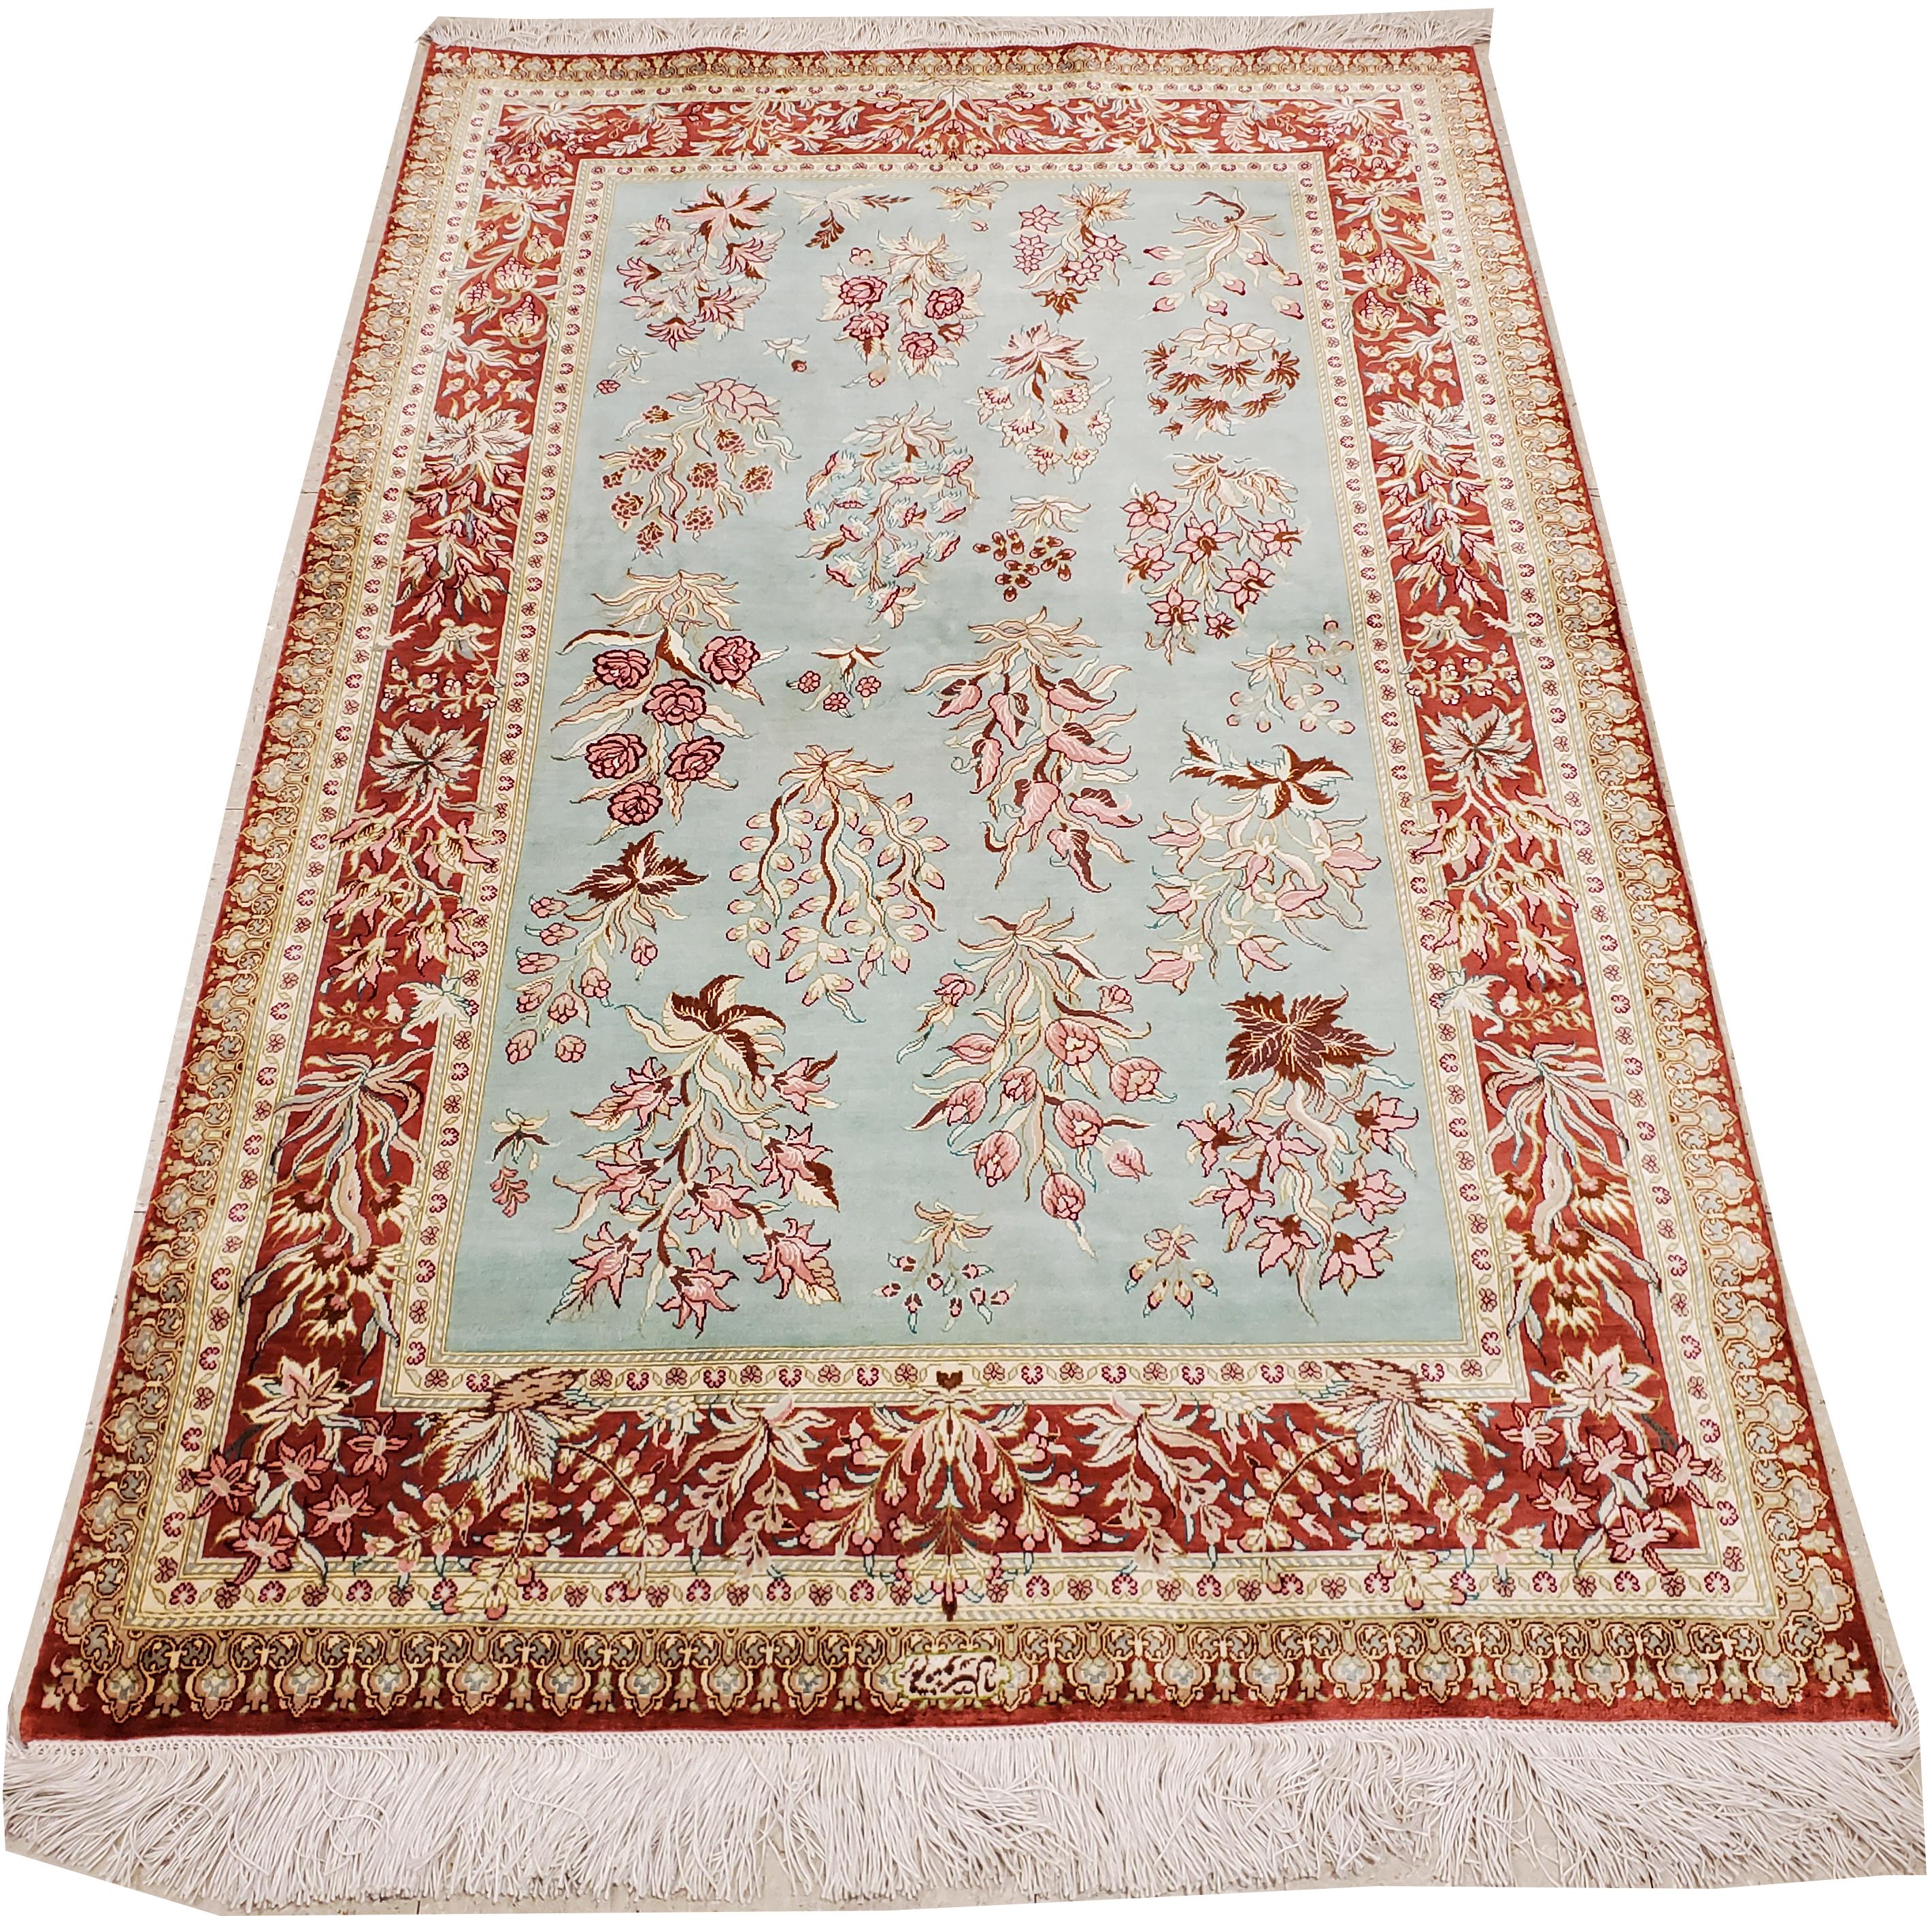 Extremely fine woven Persian silk carpet have silk pile on silk foundation. Approximately 750-800 knots per square inch.

Qum weavers are also known for producing prayer rugs with elegant tree of life designs, as well as compartment designs